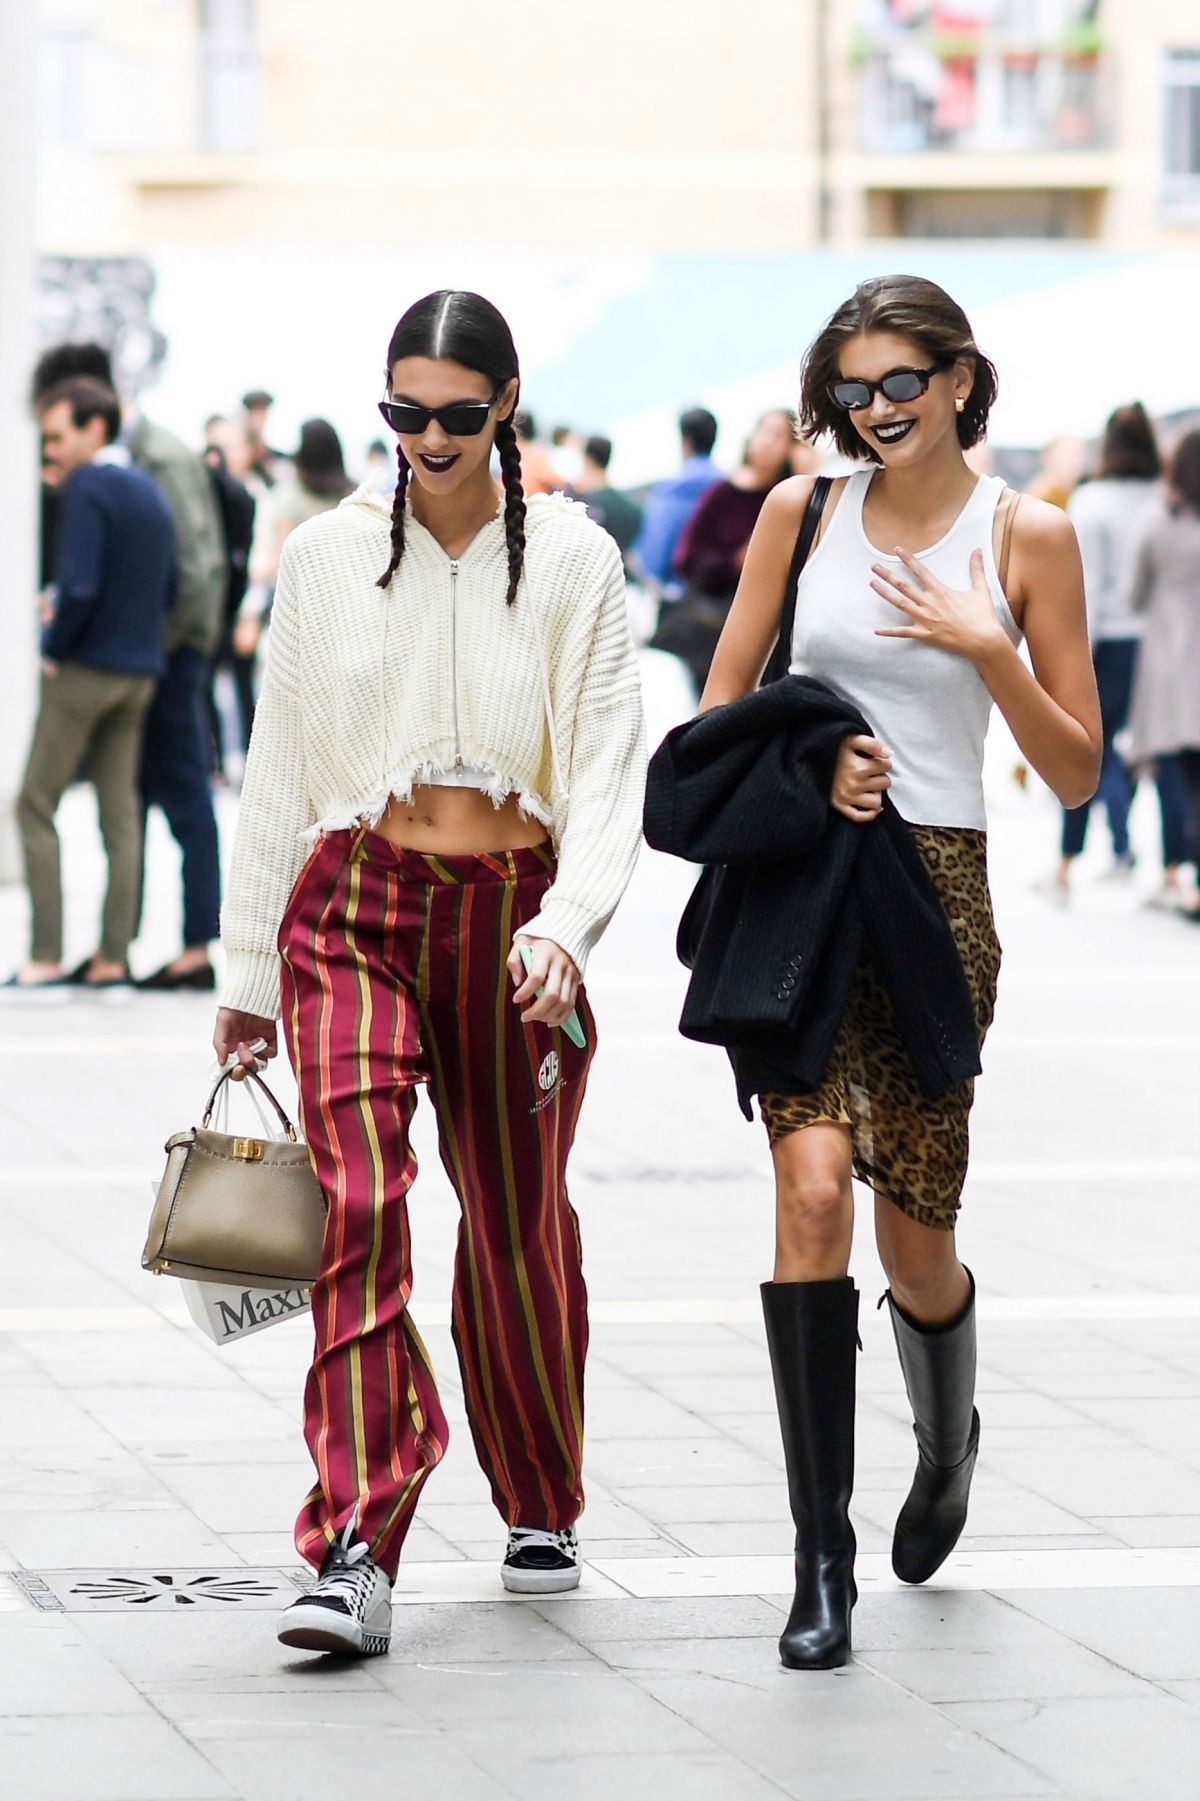 KAIA GERBER and VITTORIA CERETTI Out at Milan Fashion Week 09/18/2019 ...